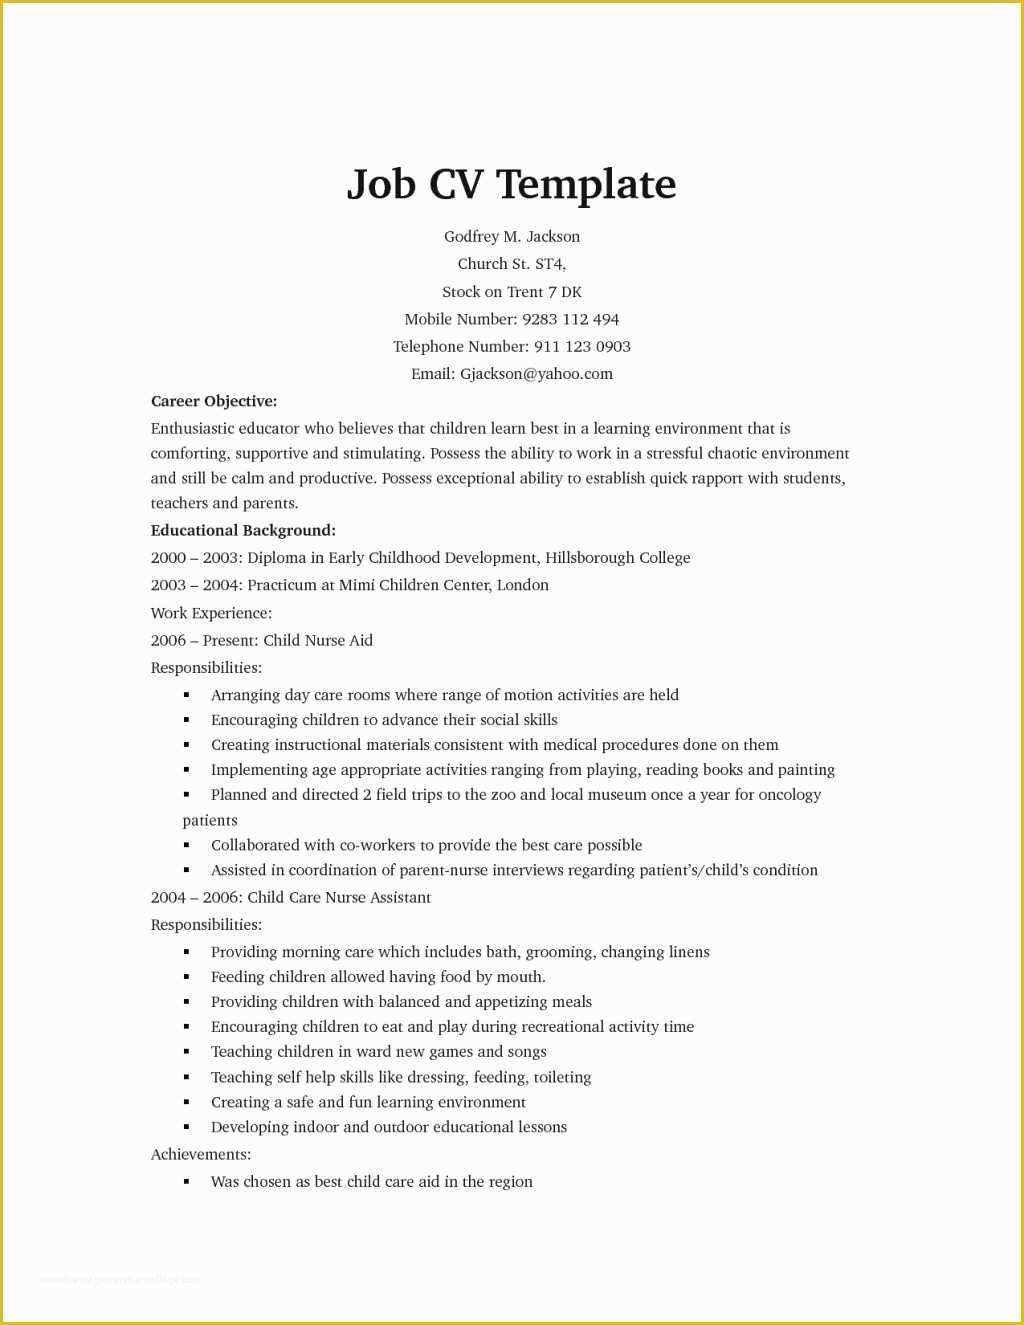 Resume Builder Template Free Microsoft Word Of Free Resume Builder and Download Tag 56 Extraordinary